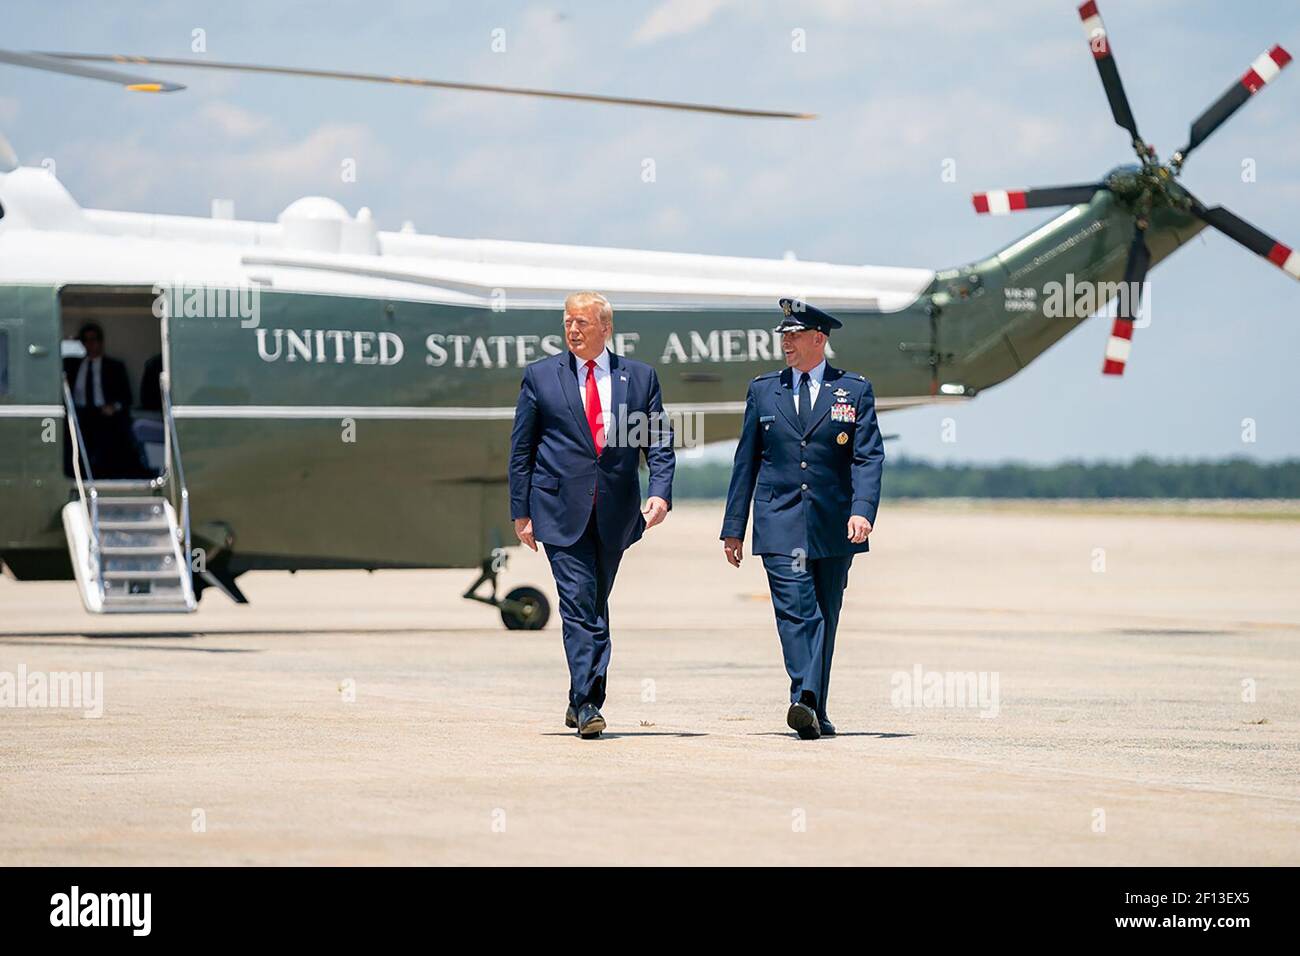 President Donald Trump disembarks Marine One and is escorted by Col. Samuel J. Chesnut vice-commander of the 89th Airlift Wing at Joint Base Andrews Md. Wednesday June 26 2019 as they walk from Marine One to board Air Force One for his trip to Japan. Stock Photo